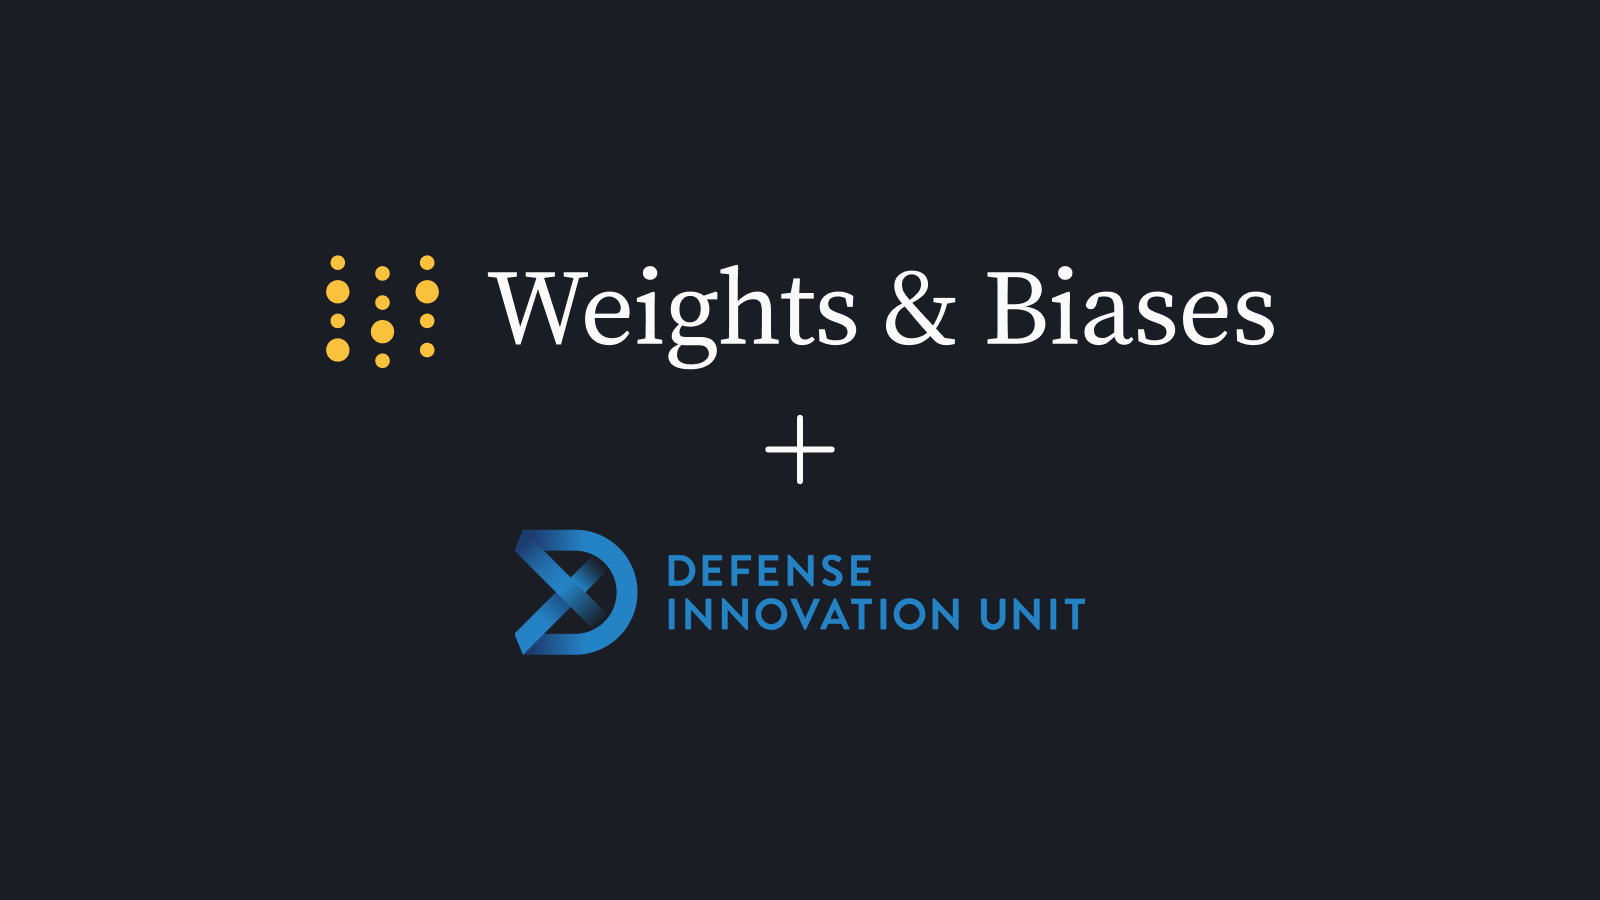 Weights & Biases Receives Recognition from Department of Defense’s Defense Innovation Unit